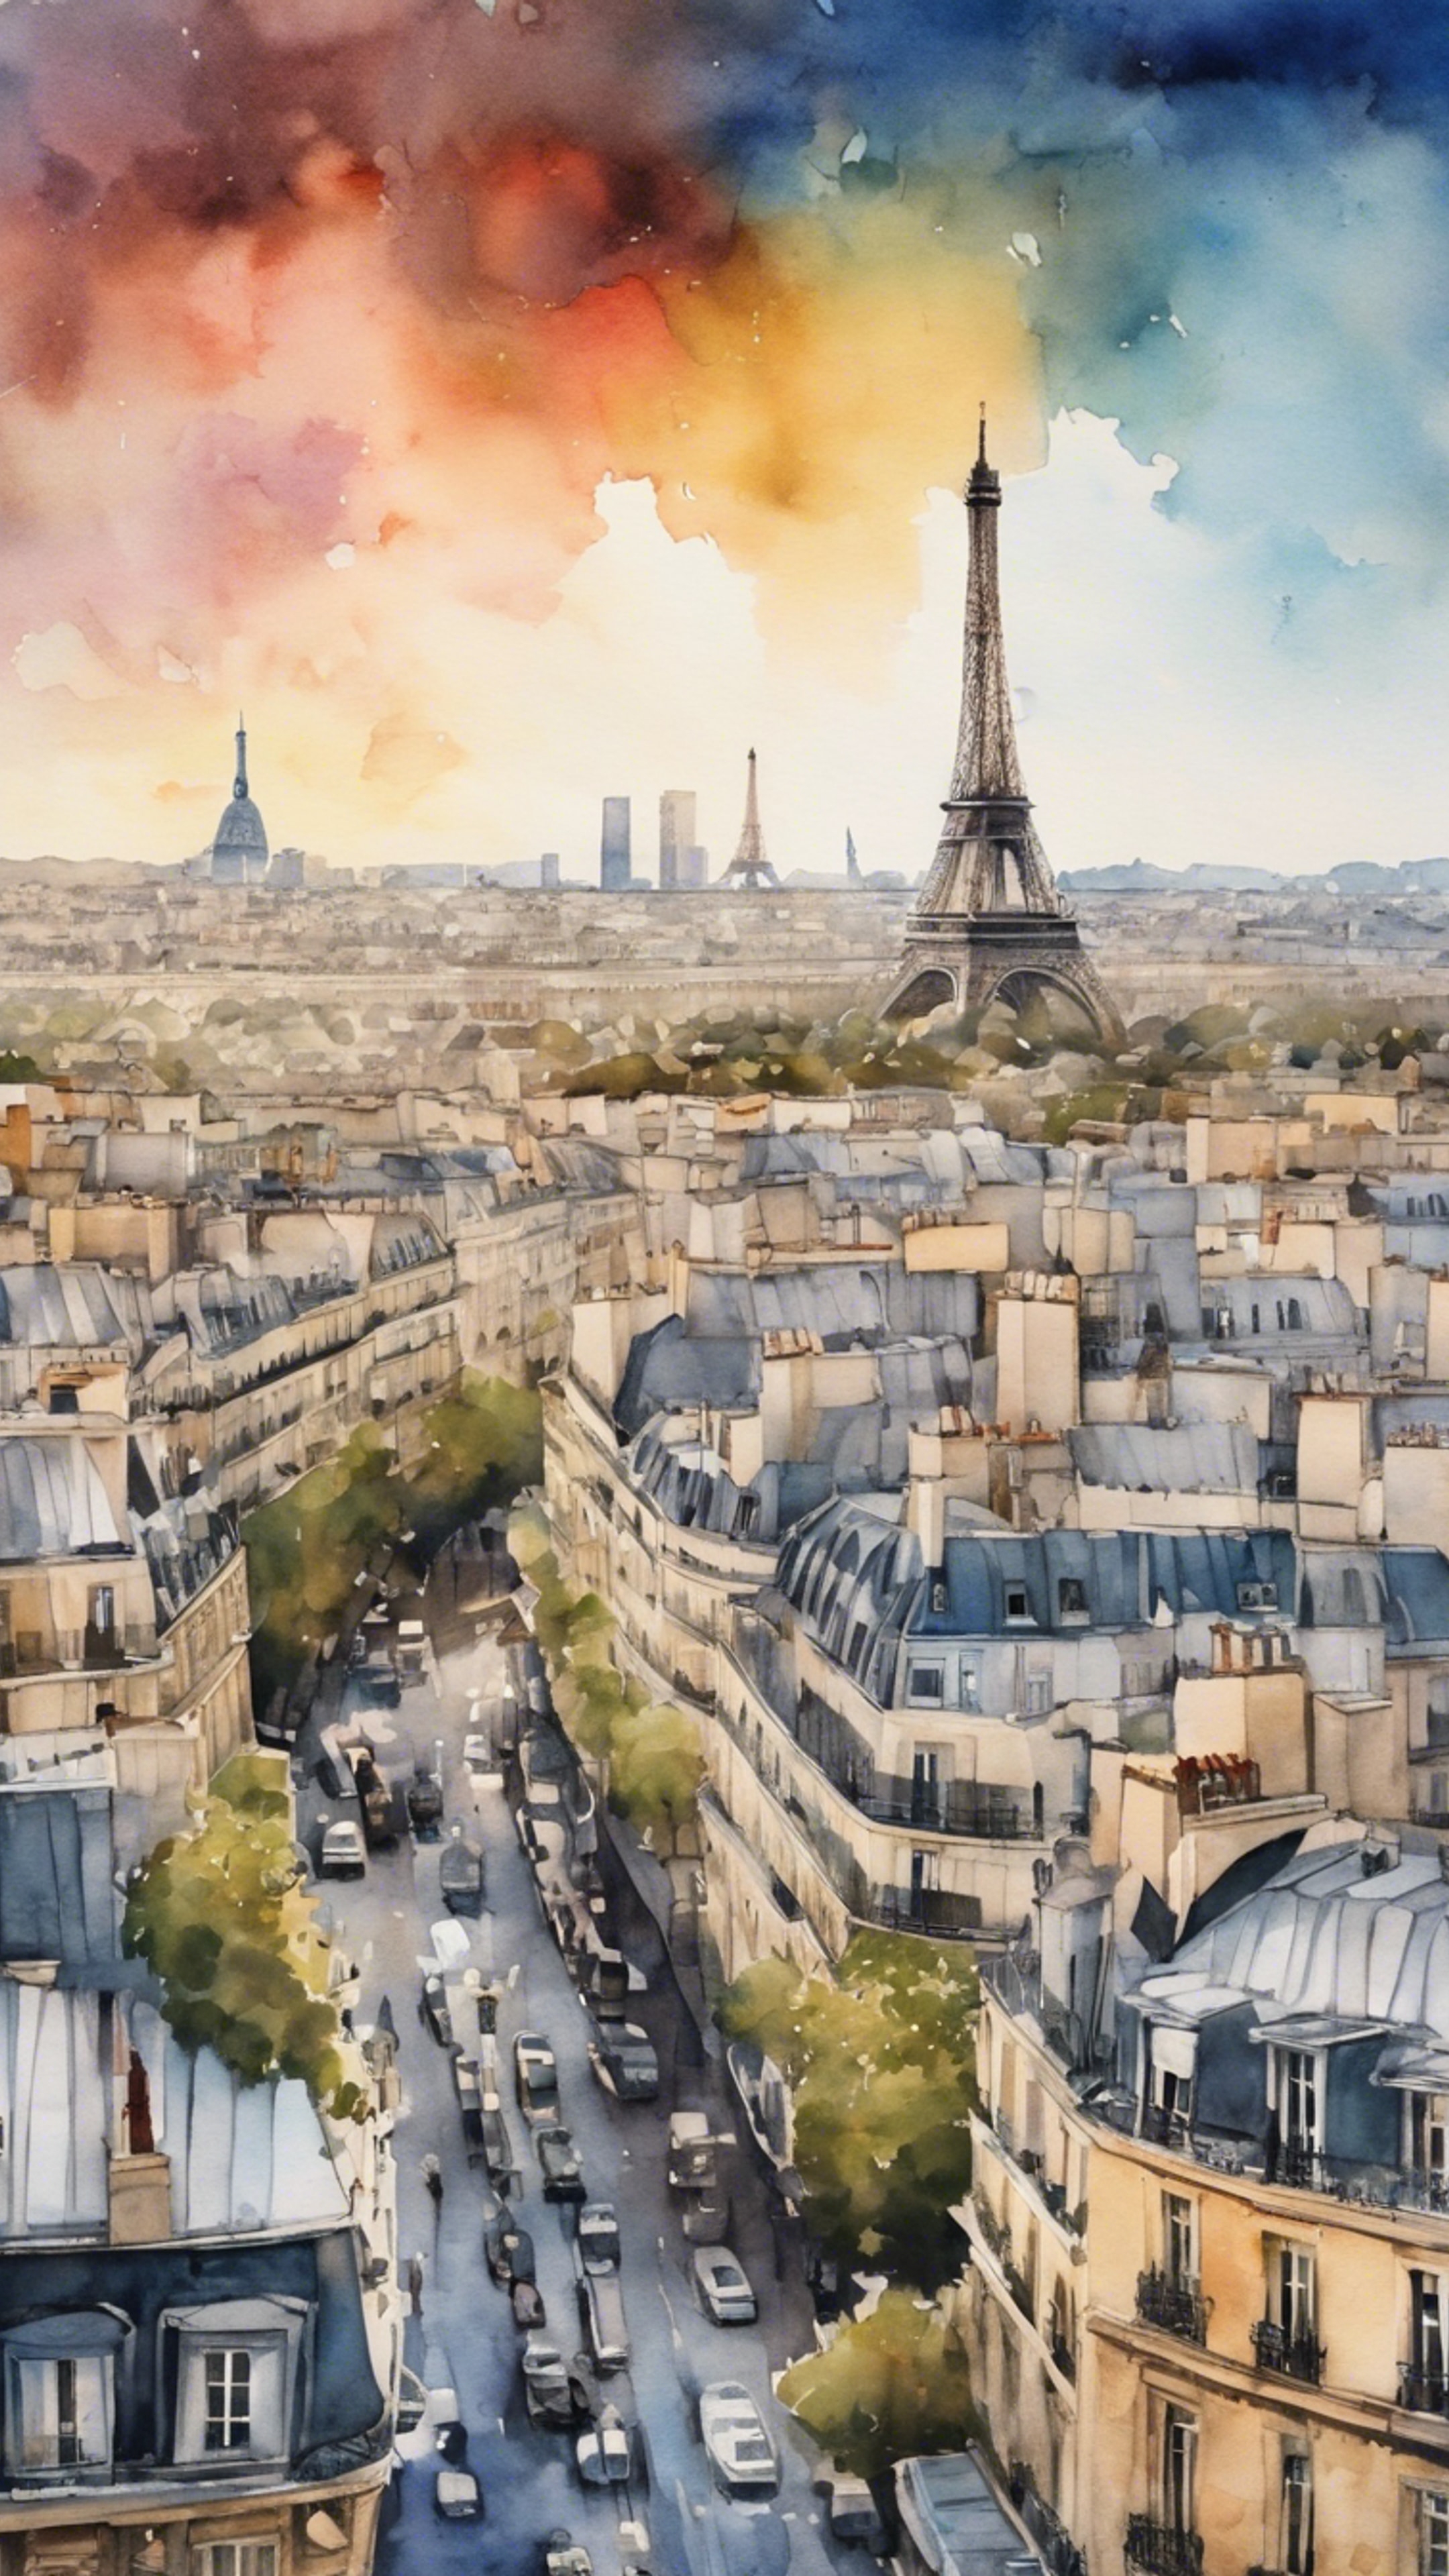 A vivid watercolor painting of the Paris skyline, its iconic landmarks like brush strokes against an evening sky.壁紙[88384a5373d74544ae8f]